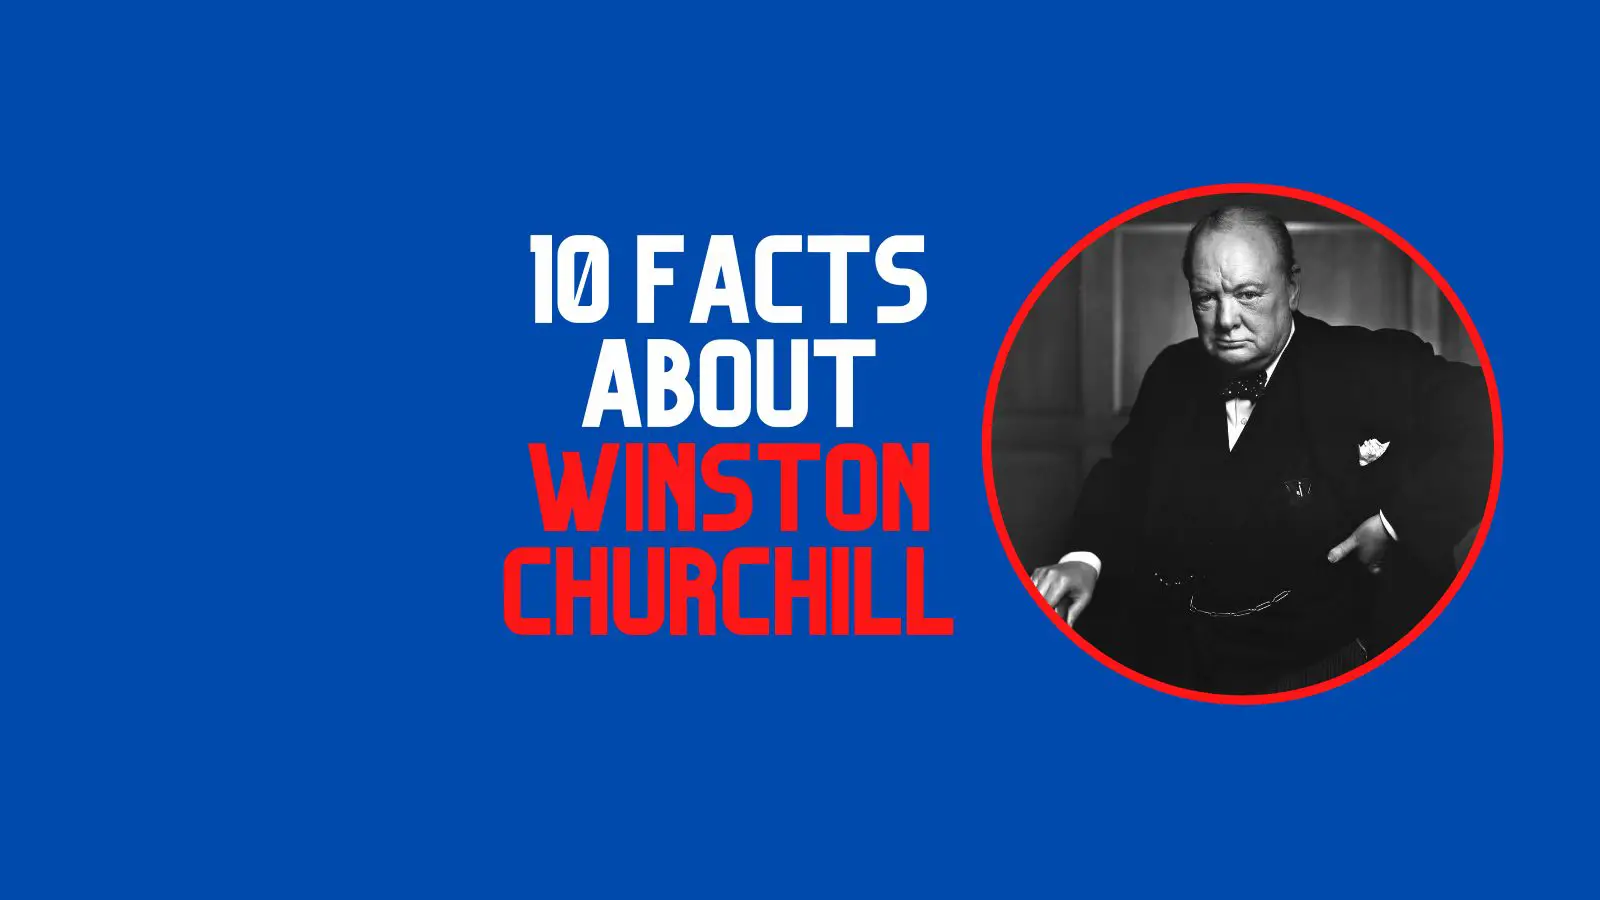 Facts about Winston Churchill